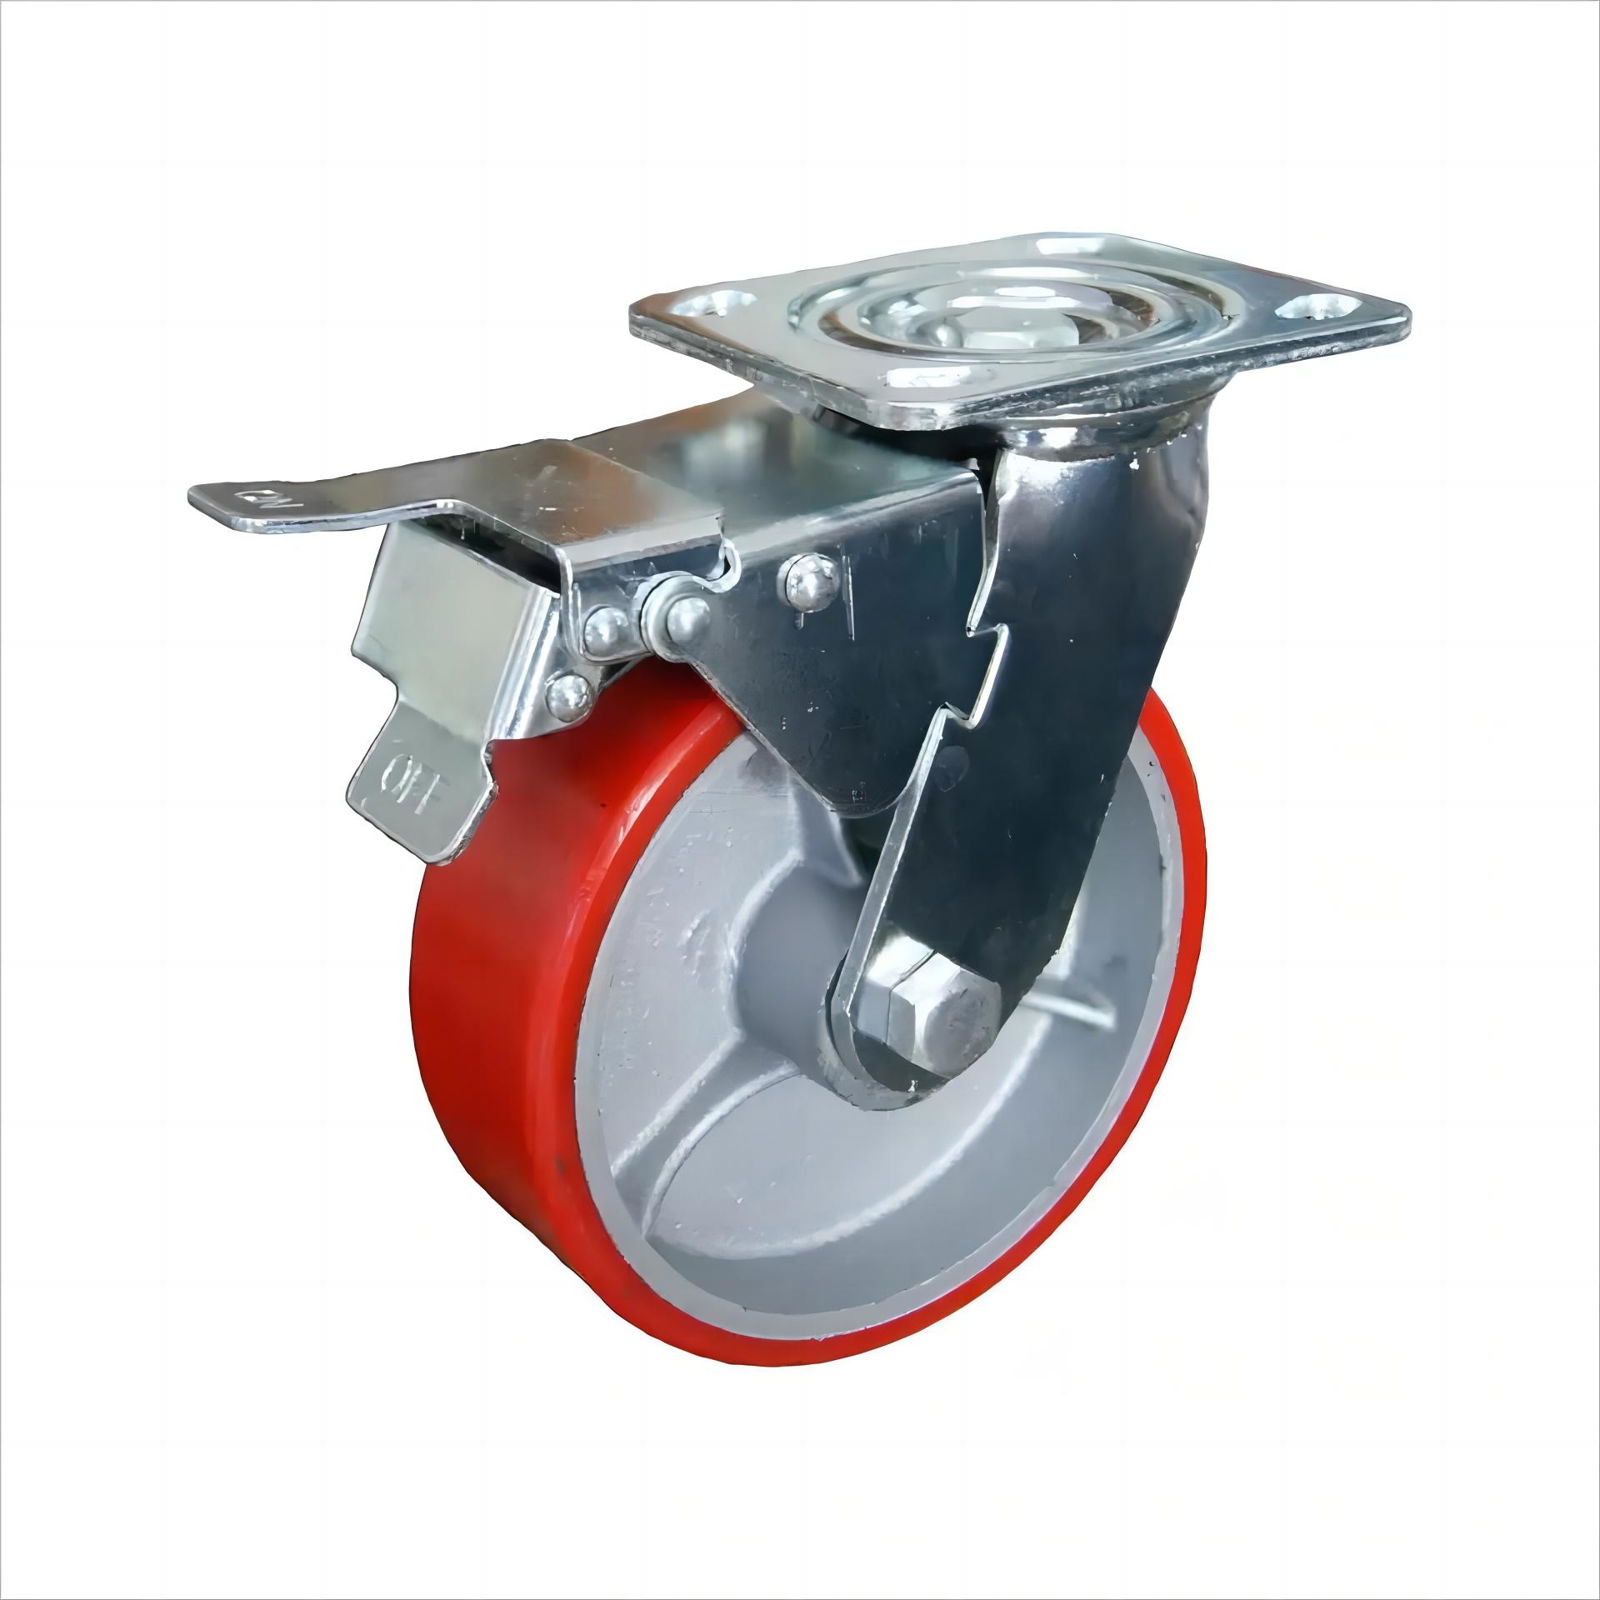 6 "iron core red PU trolley casters 2